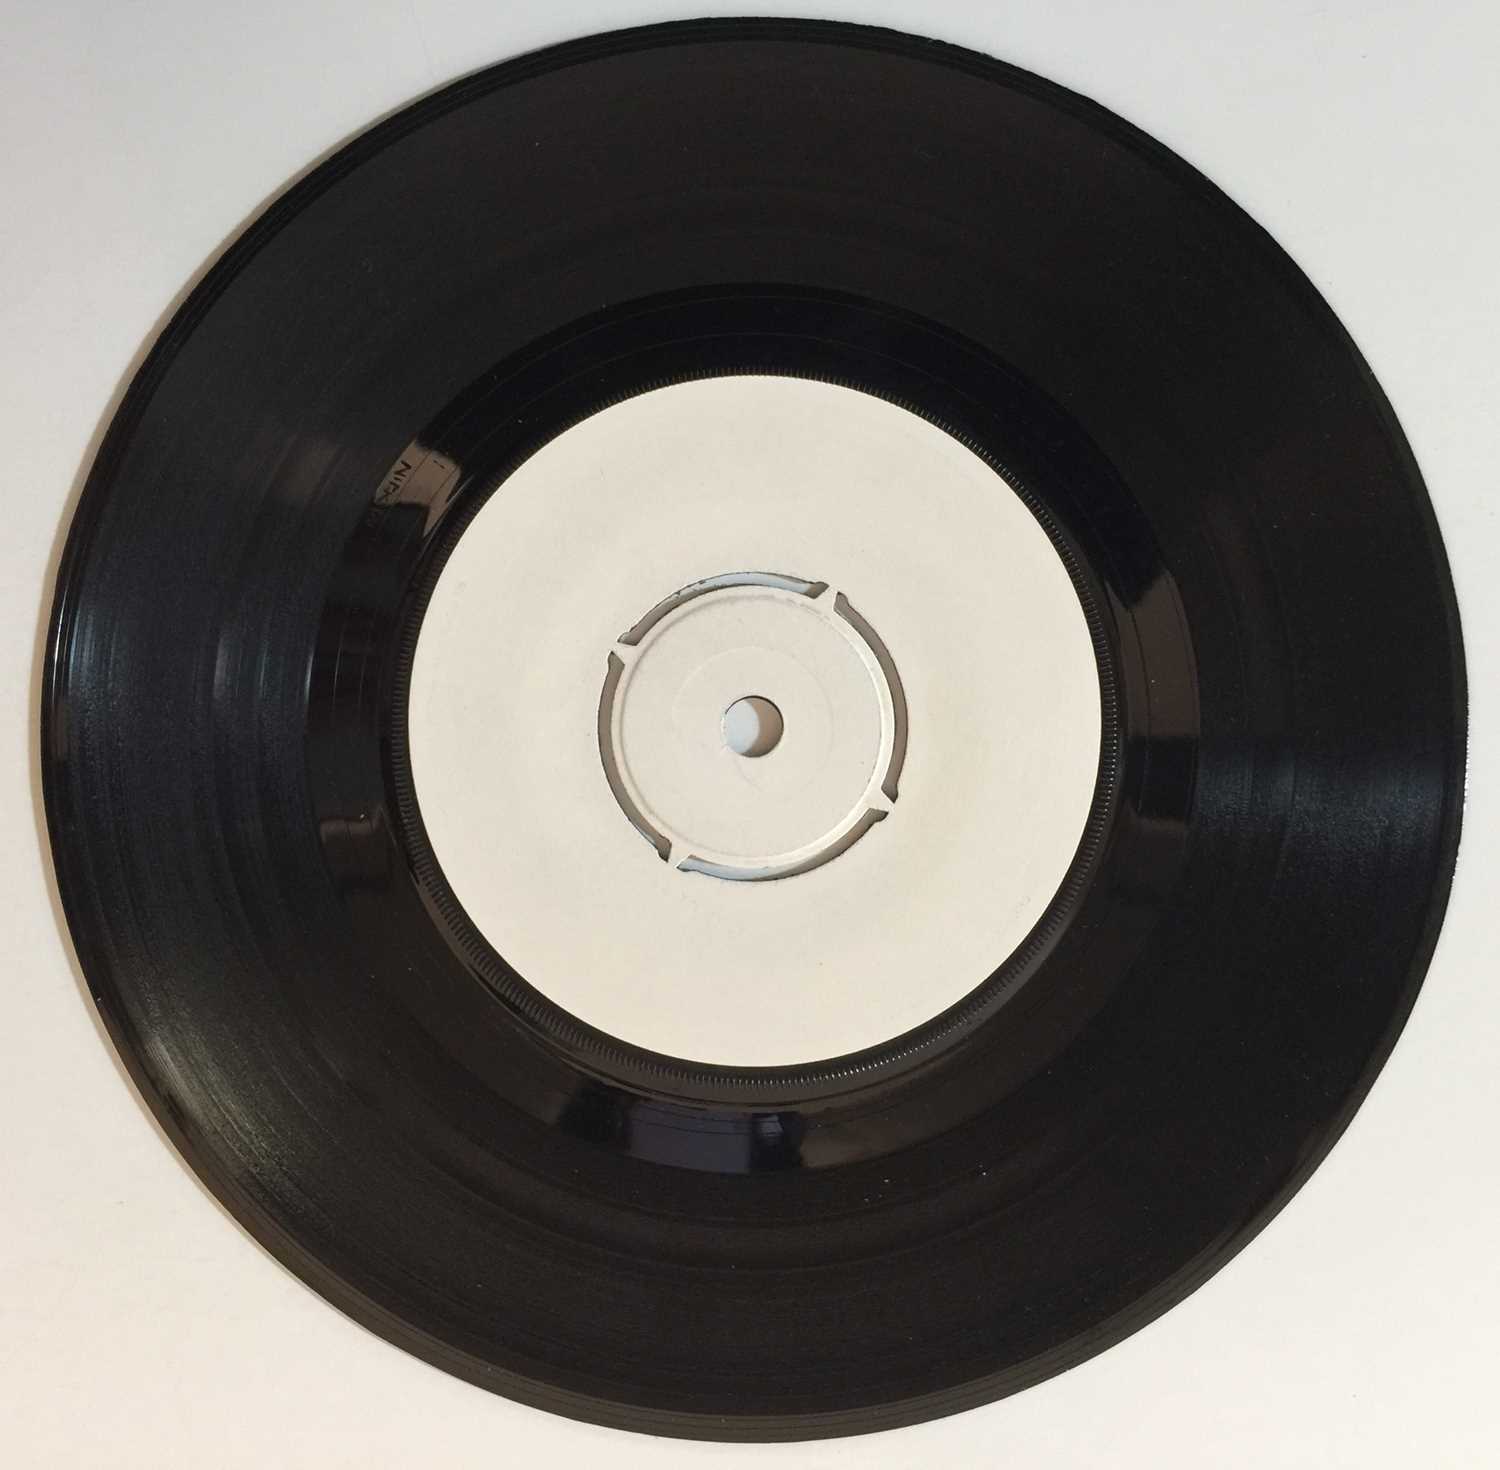 Queen - Somebody To Love 7" (UK White Label Test Pressing - EMI 2565 - Image 4 of 4